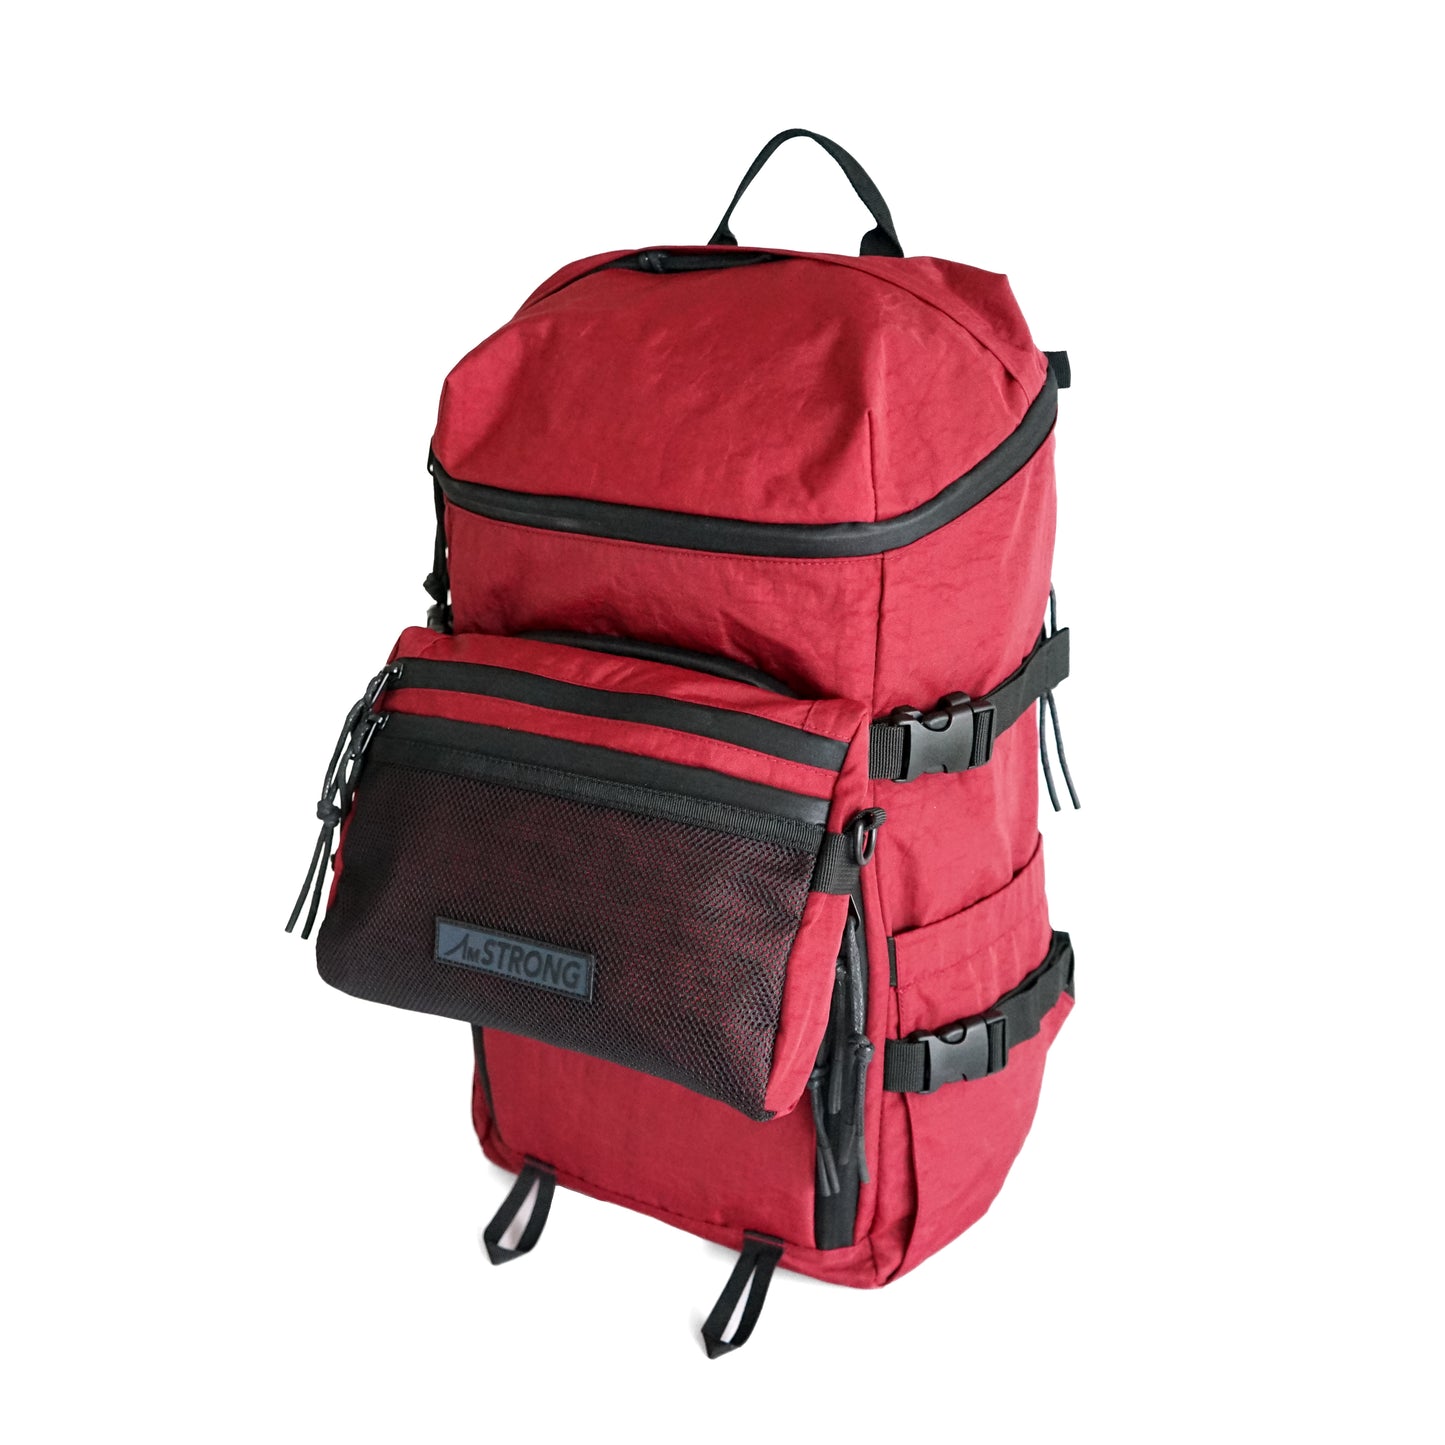 01-UTILITY PACK 多用途小袋